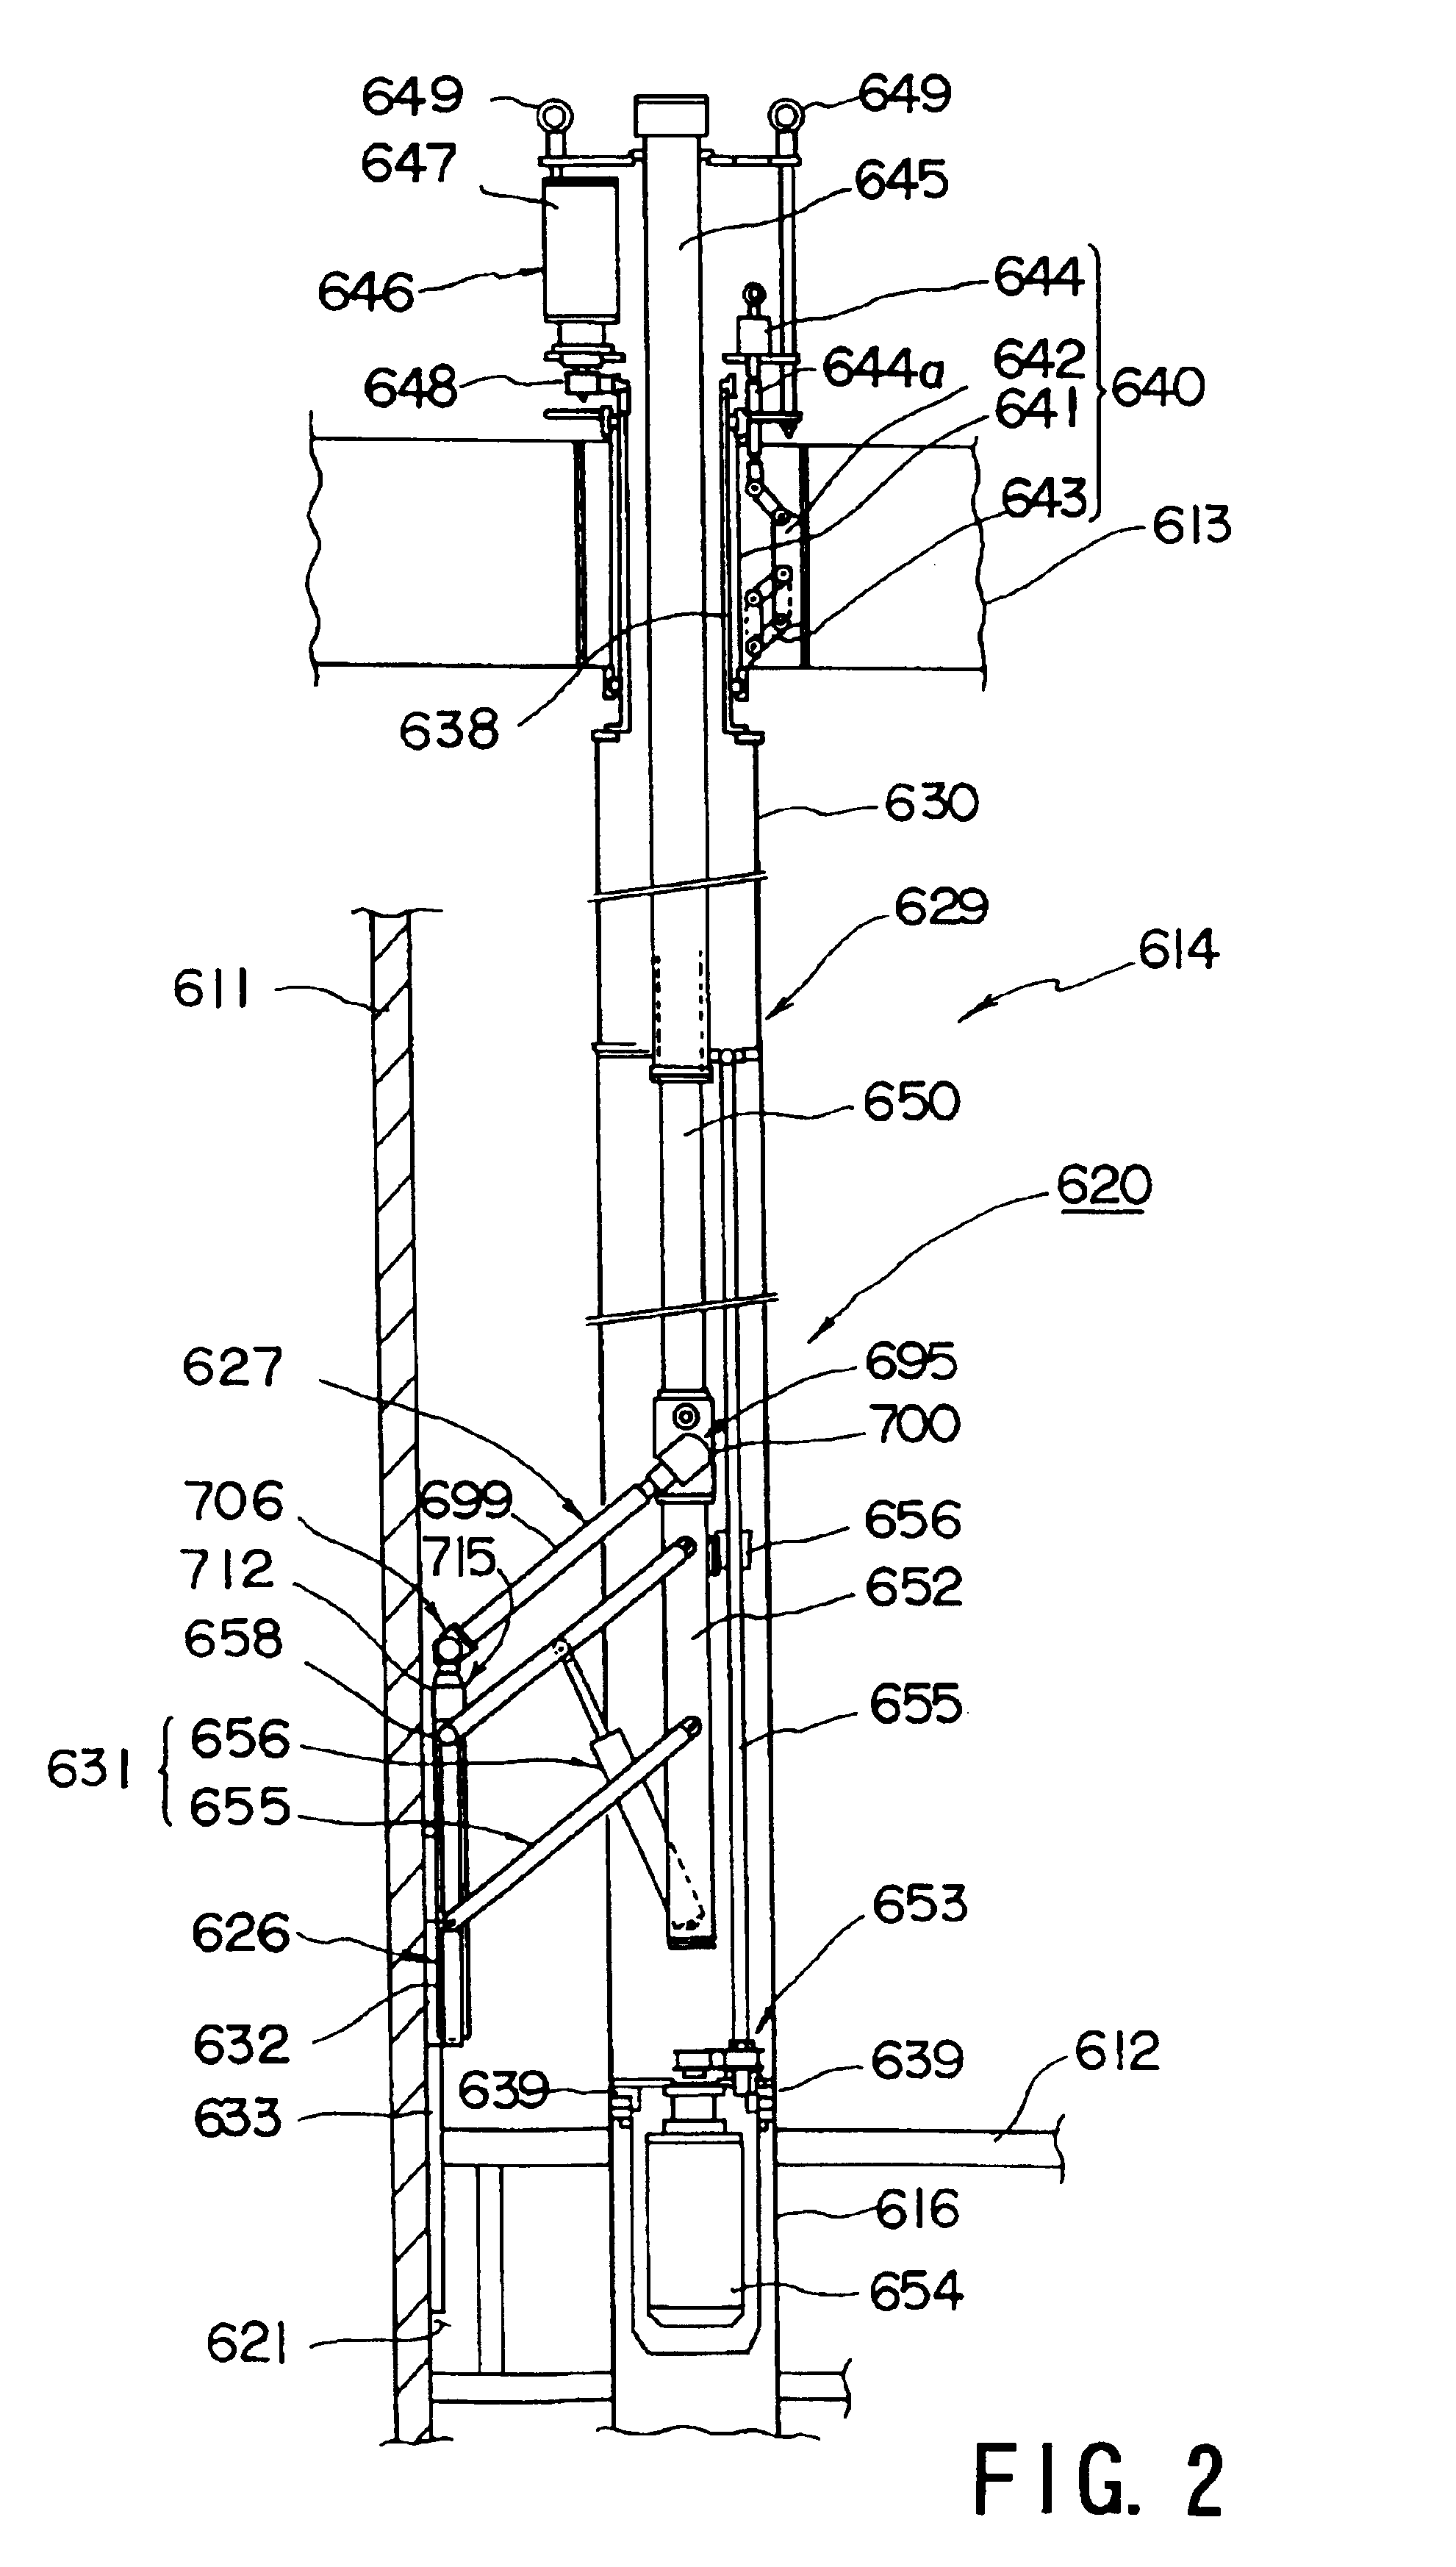 Laser emission head, laser beam transmission device, laser beam transmission device adjustment method and preventive maintenance/repair device of structure in nuclear reactor